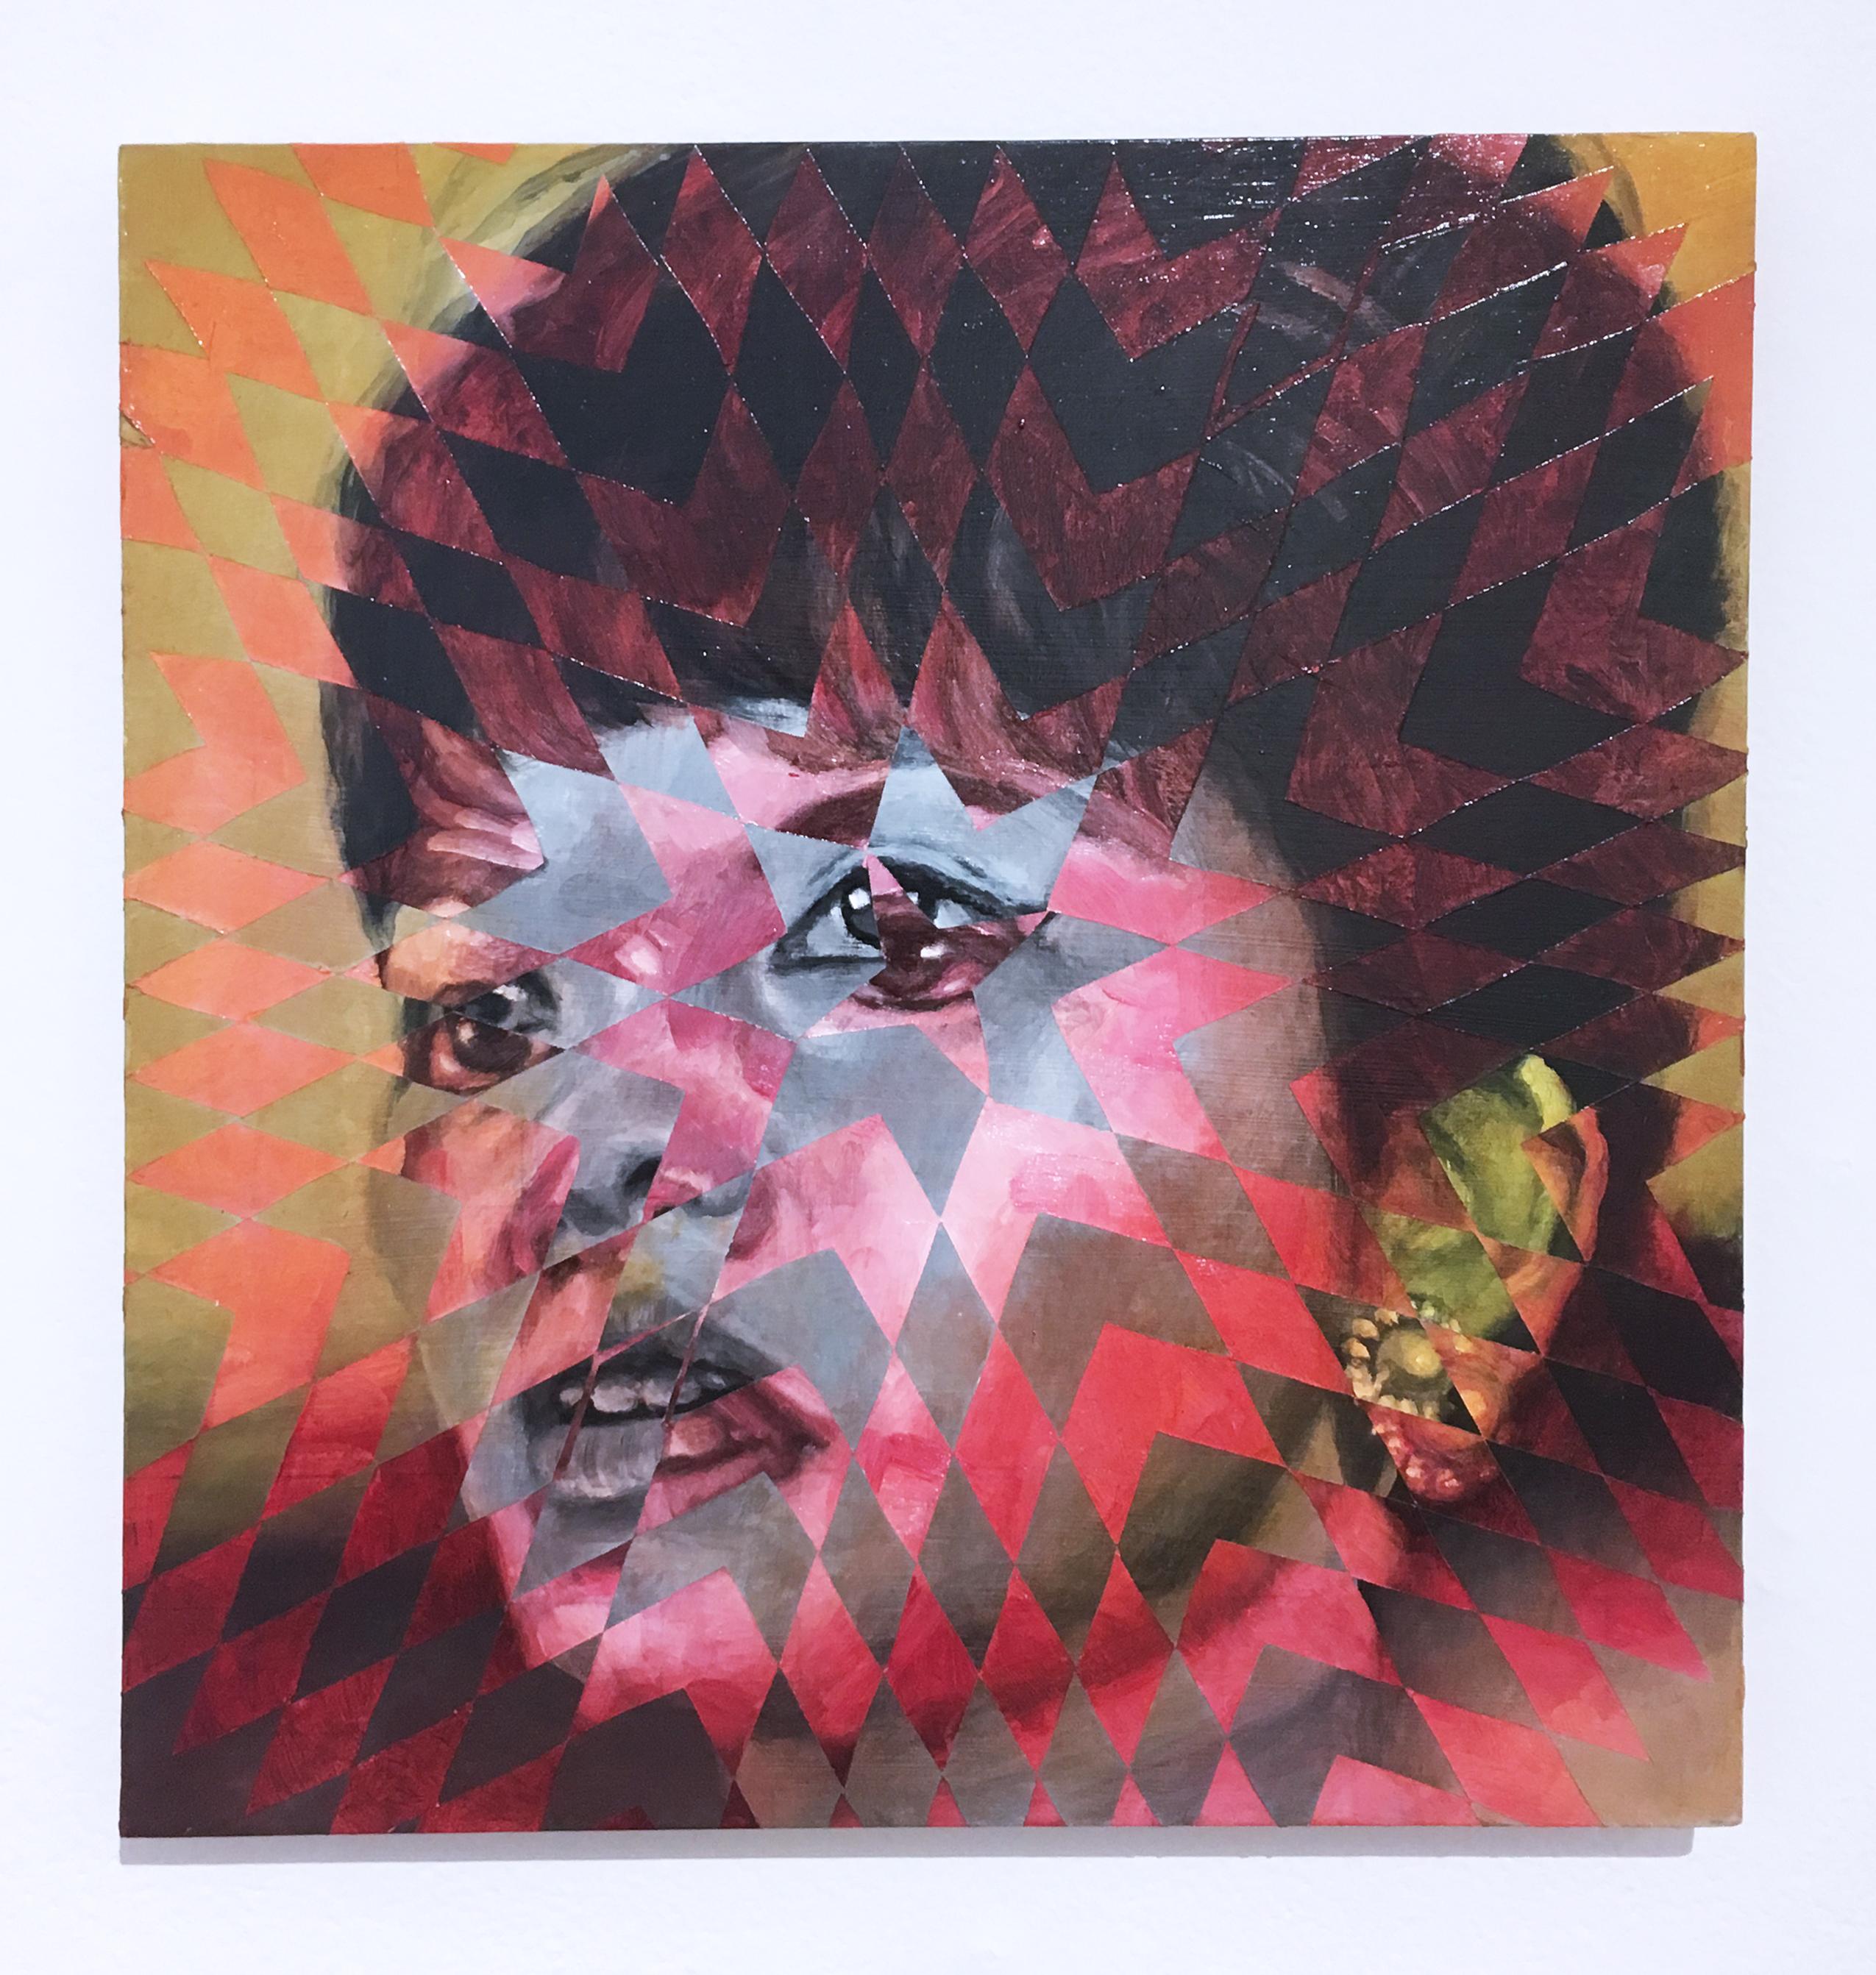 Madame Nhu aka The Dragon Lady by JAHRU
Oil and acrylic painting on MDF.  Portraiture with patterns and distortions by contemporary street artist JAHRU aka Jeff Huntington. Bright, saturated hot pinks and light pinks, oranges and yellows with a